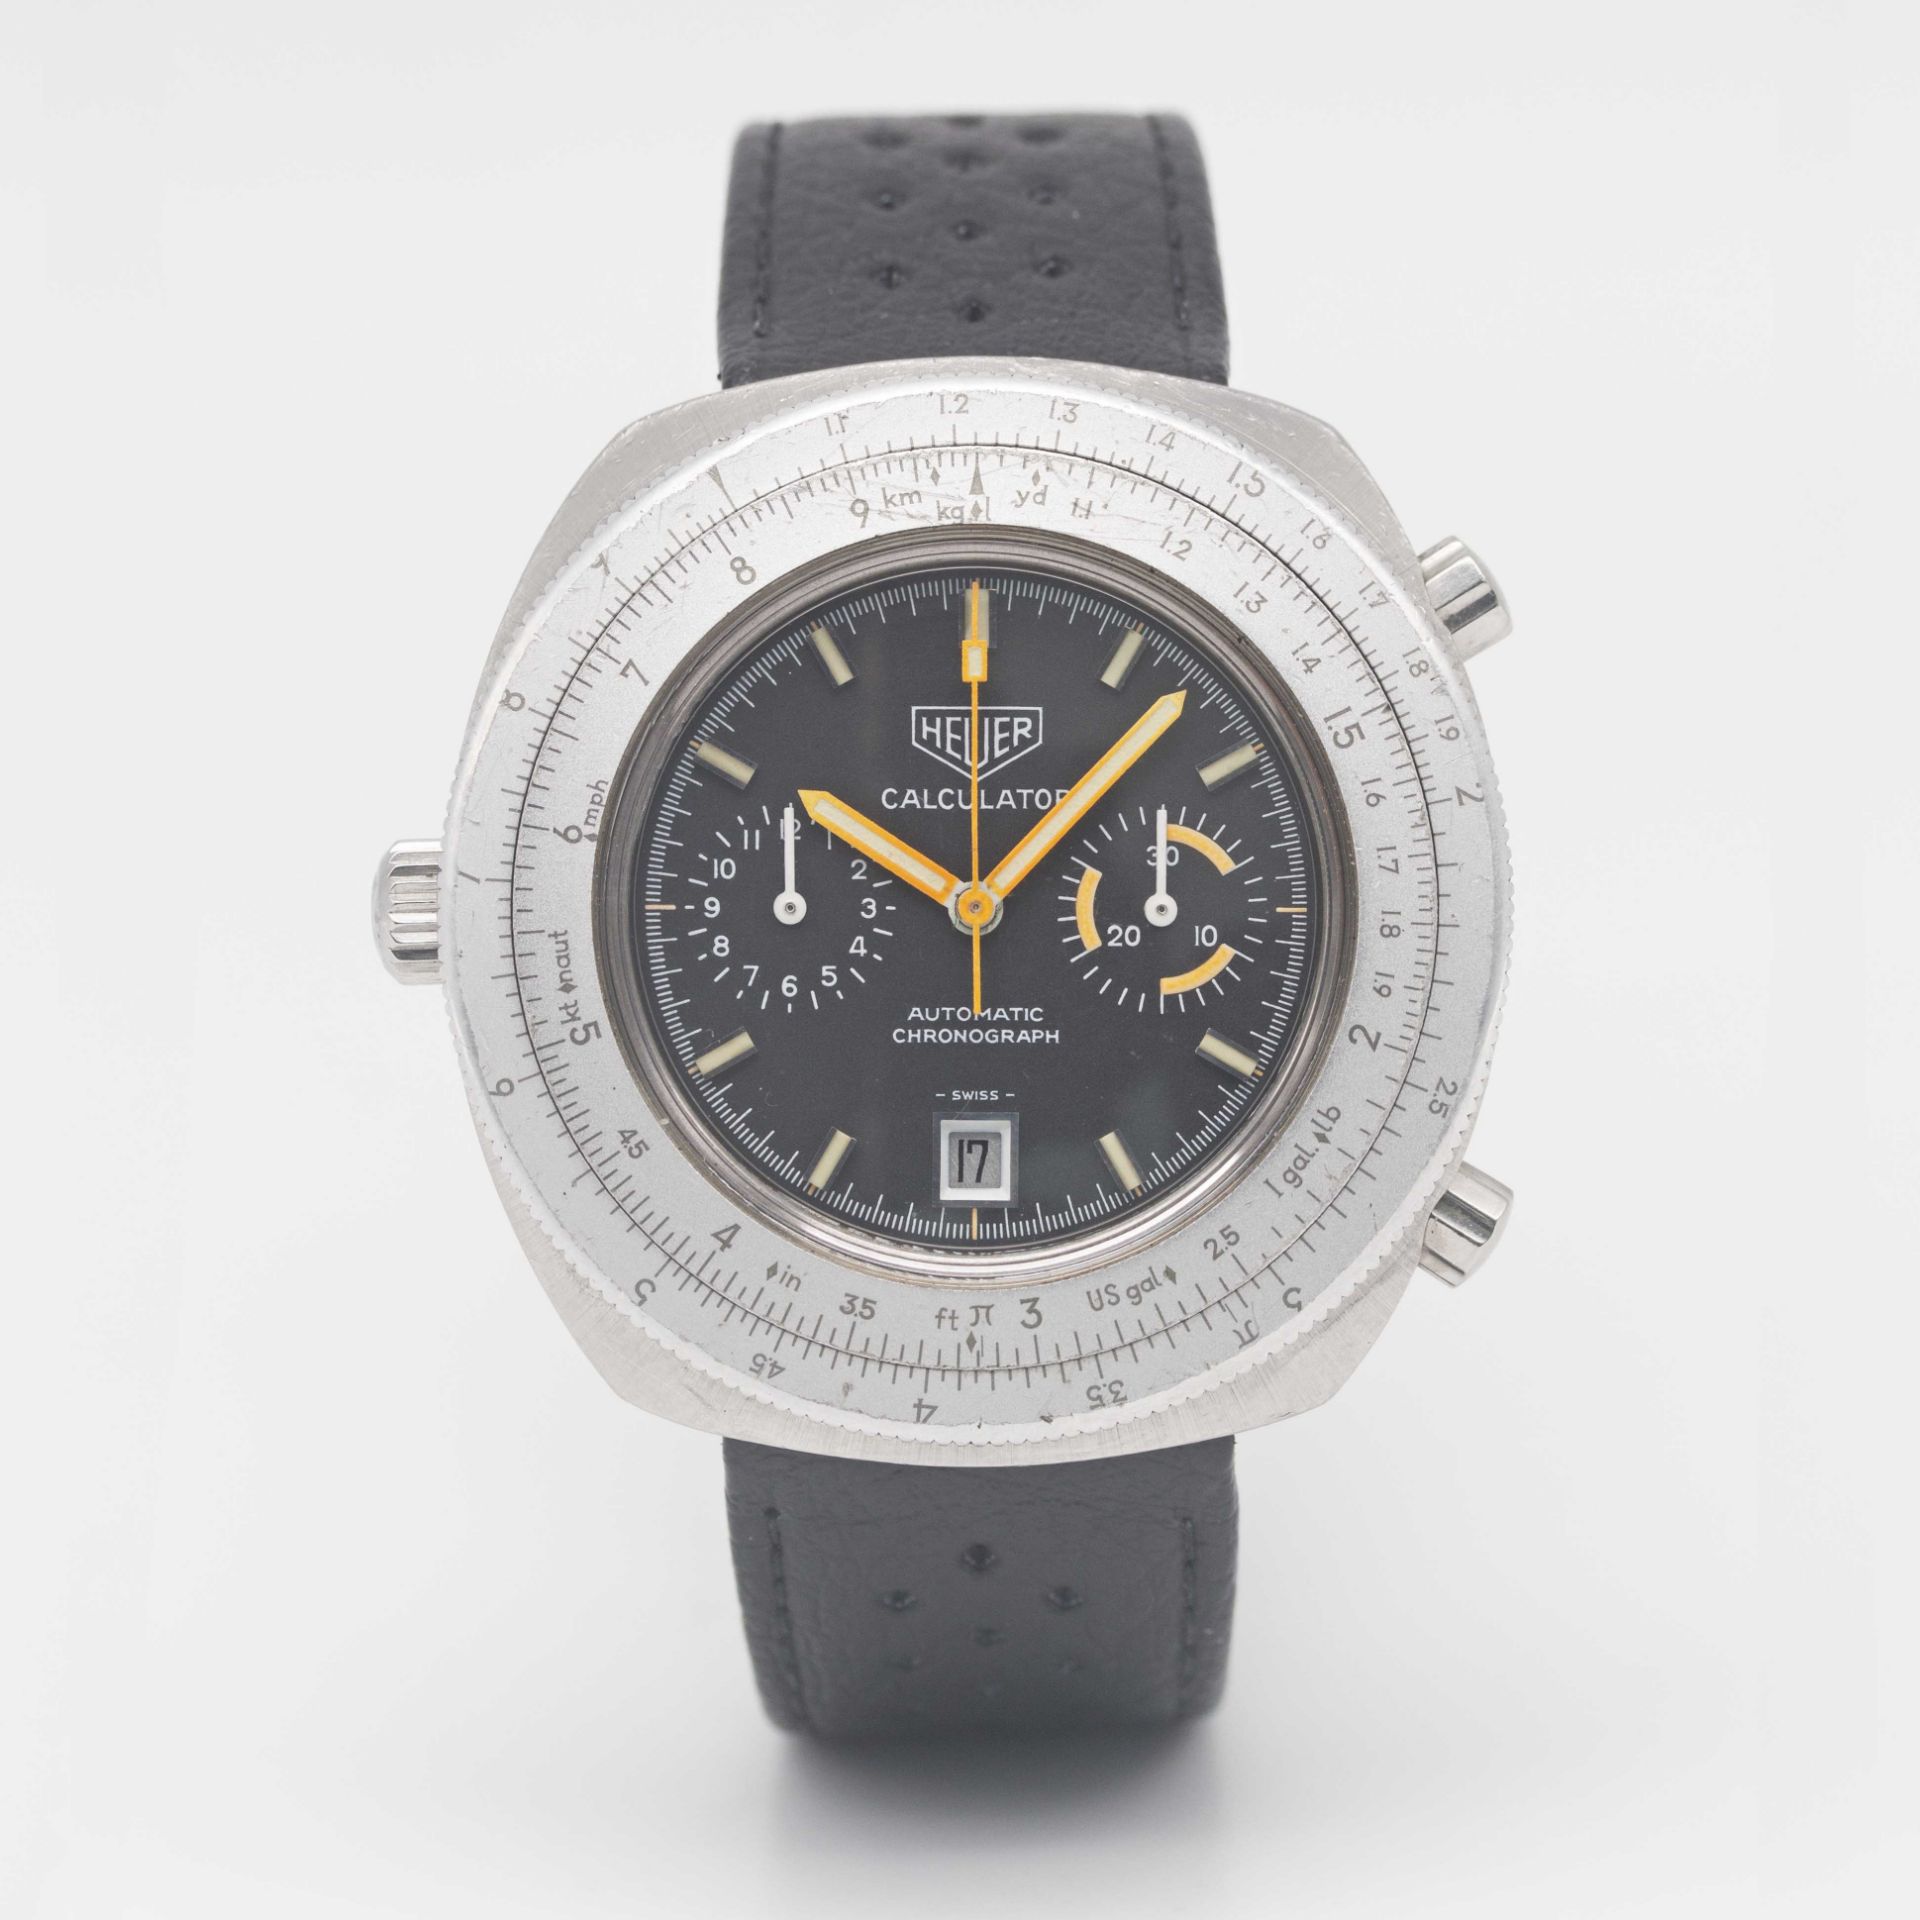 A GENTLEMAN'S STAINLESS STEEL HEUER CALCULATOR AUTOMATIC CHRONOGRAPH WRIST WATCH CIRCA 1970s, REF. - Image 2 of 8